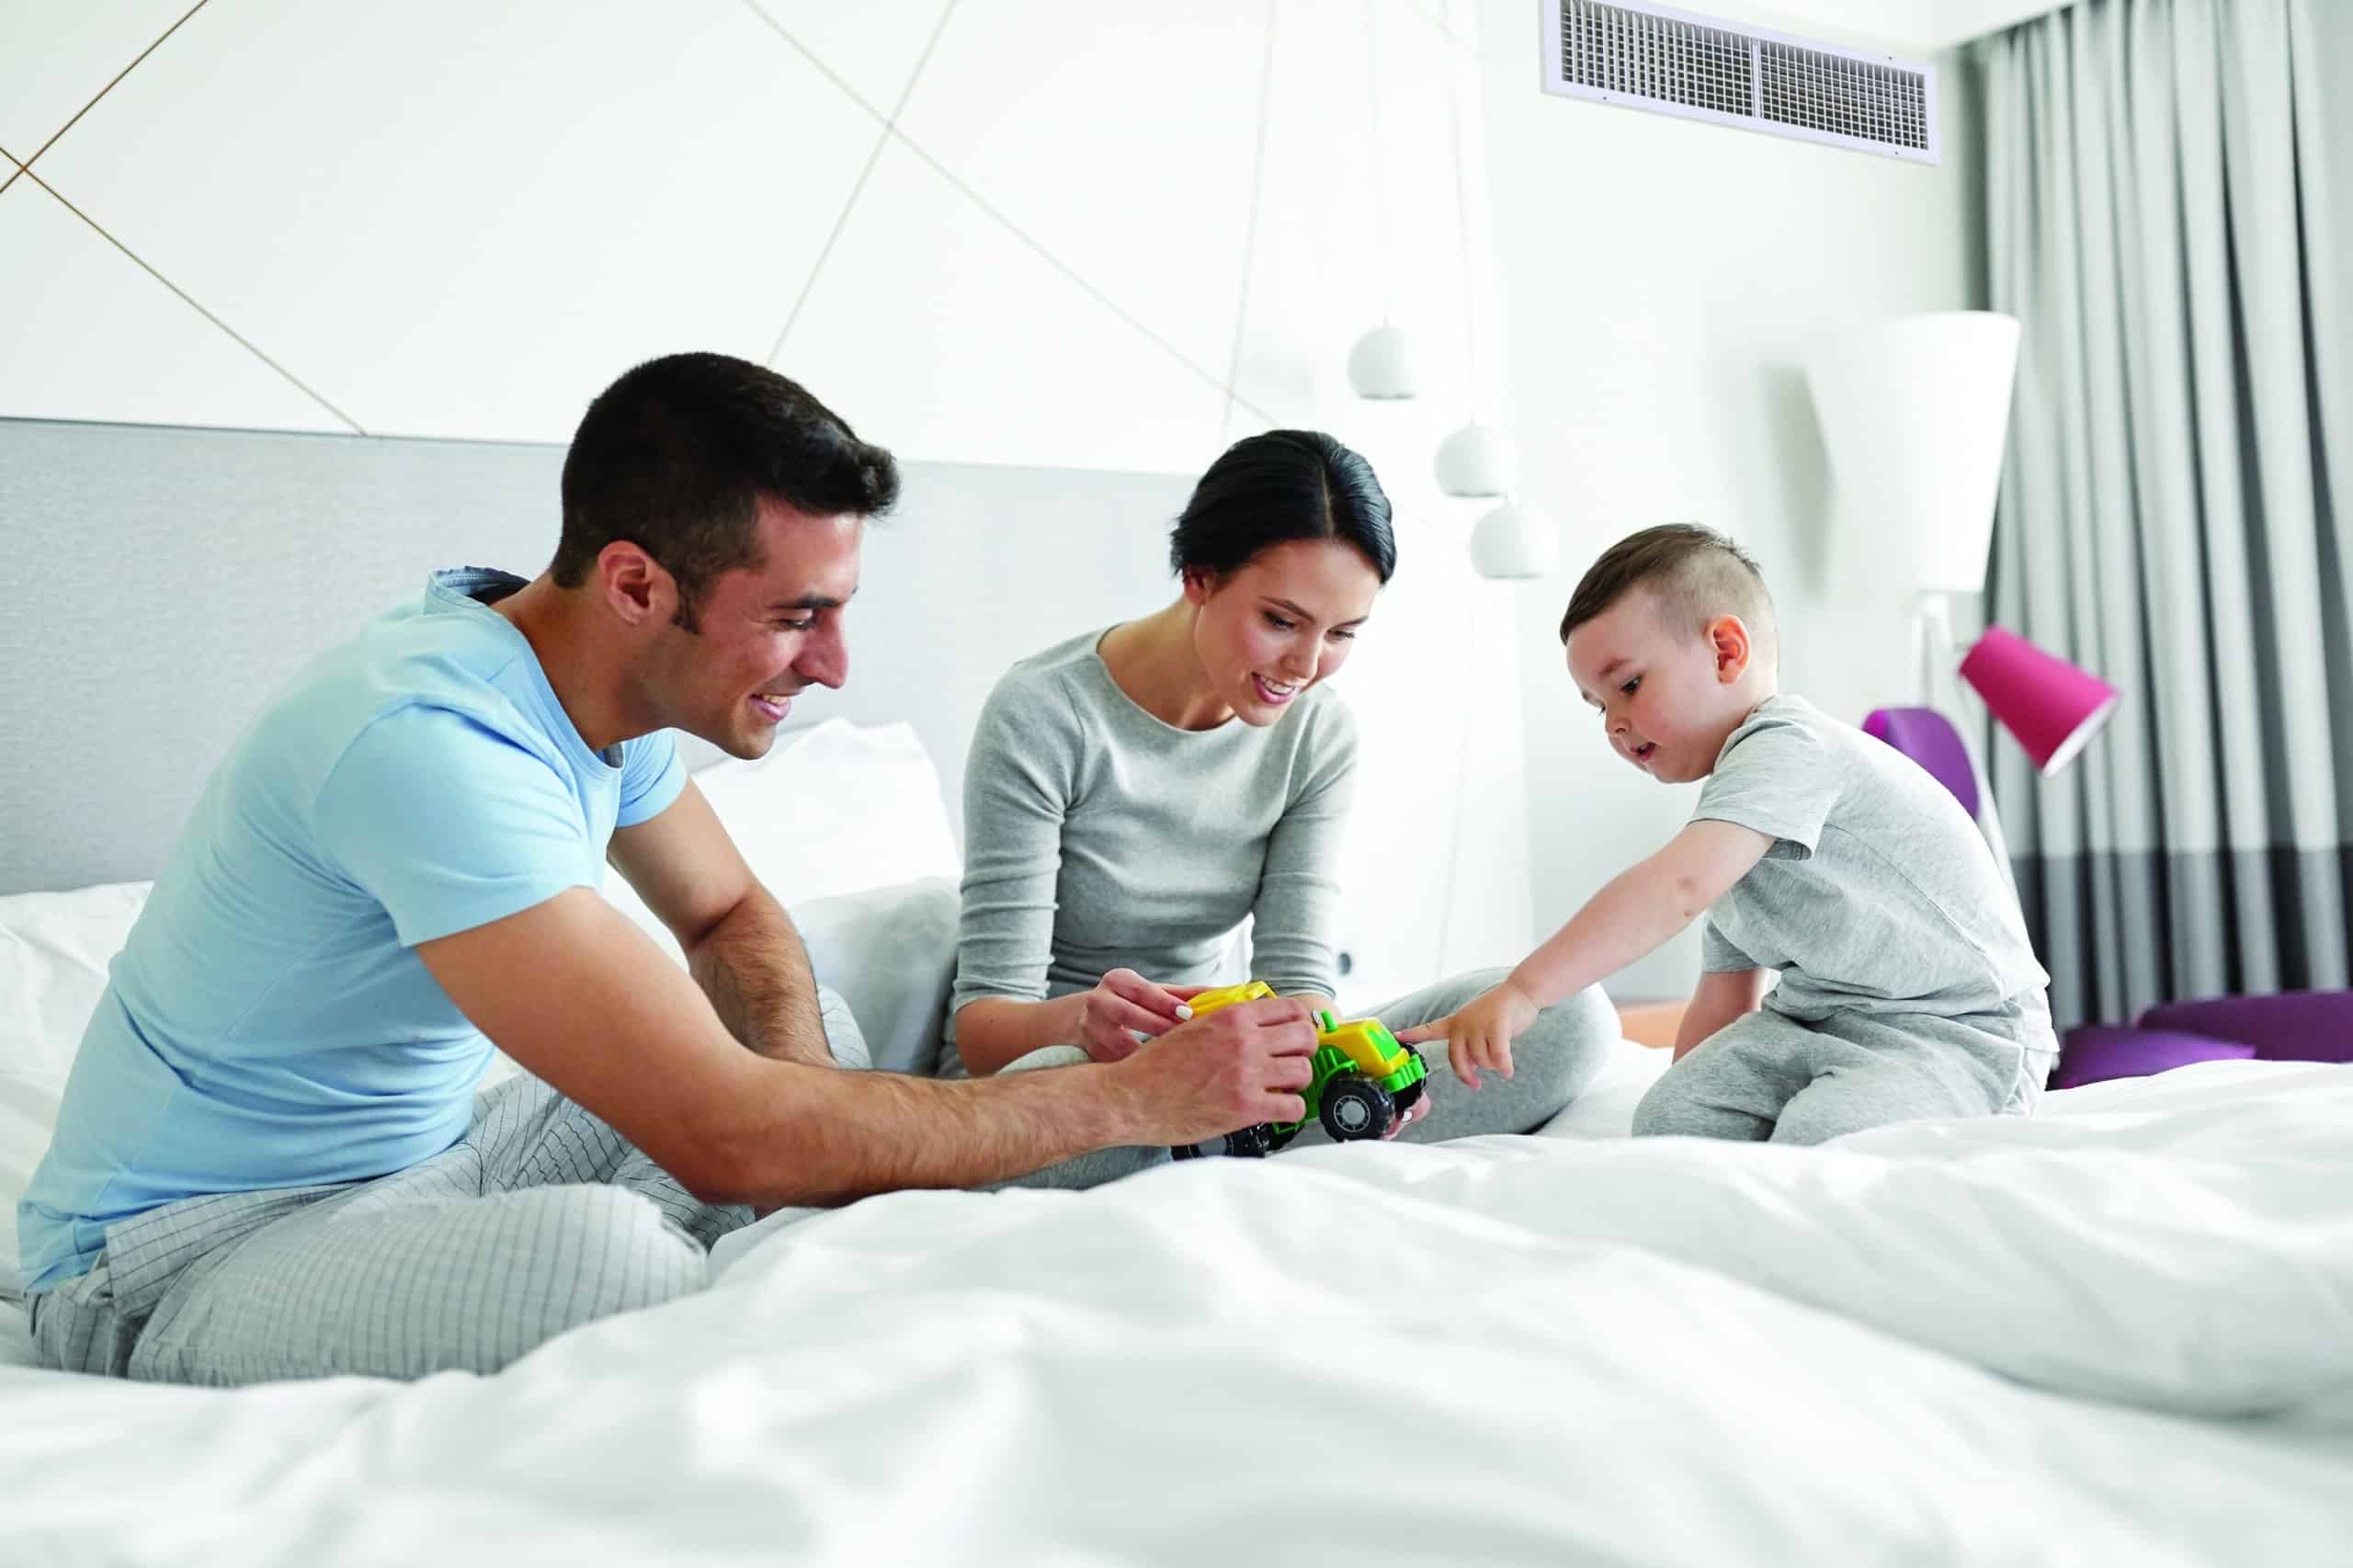 Photo of family playing with toys on the bed in the room with the inside unit of Skyair system visable.